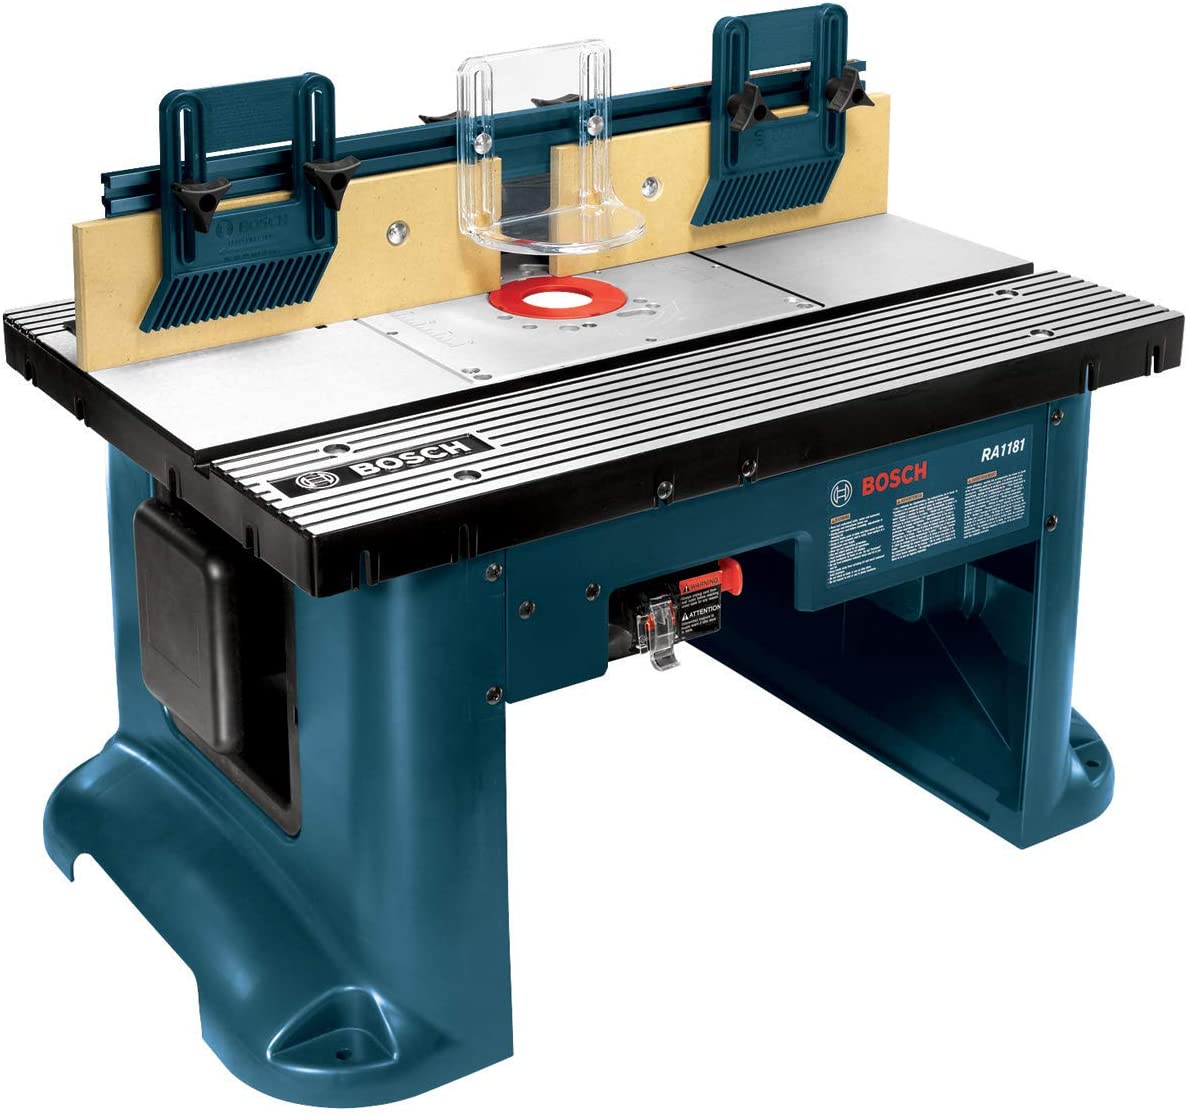 The Best Place to Buy a Router Table: Amazon.com